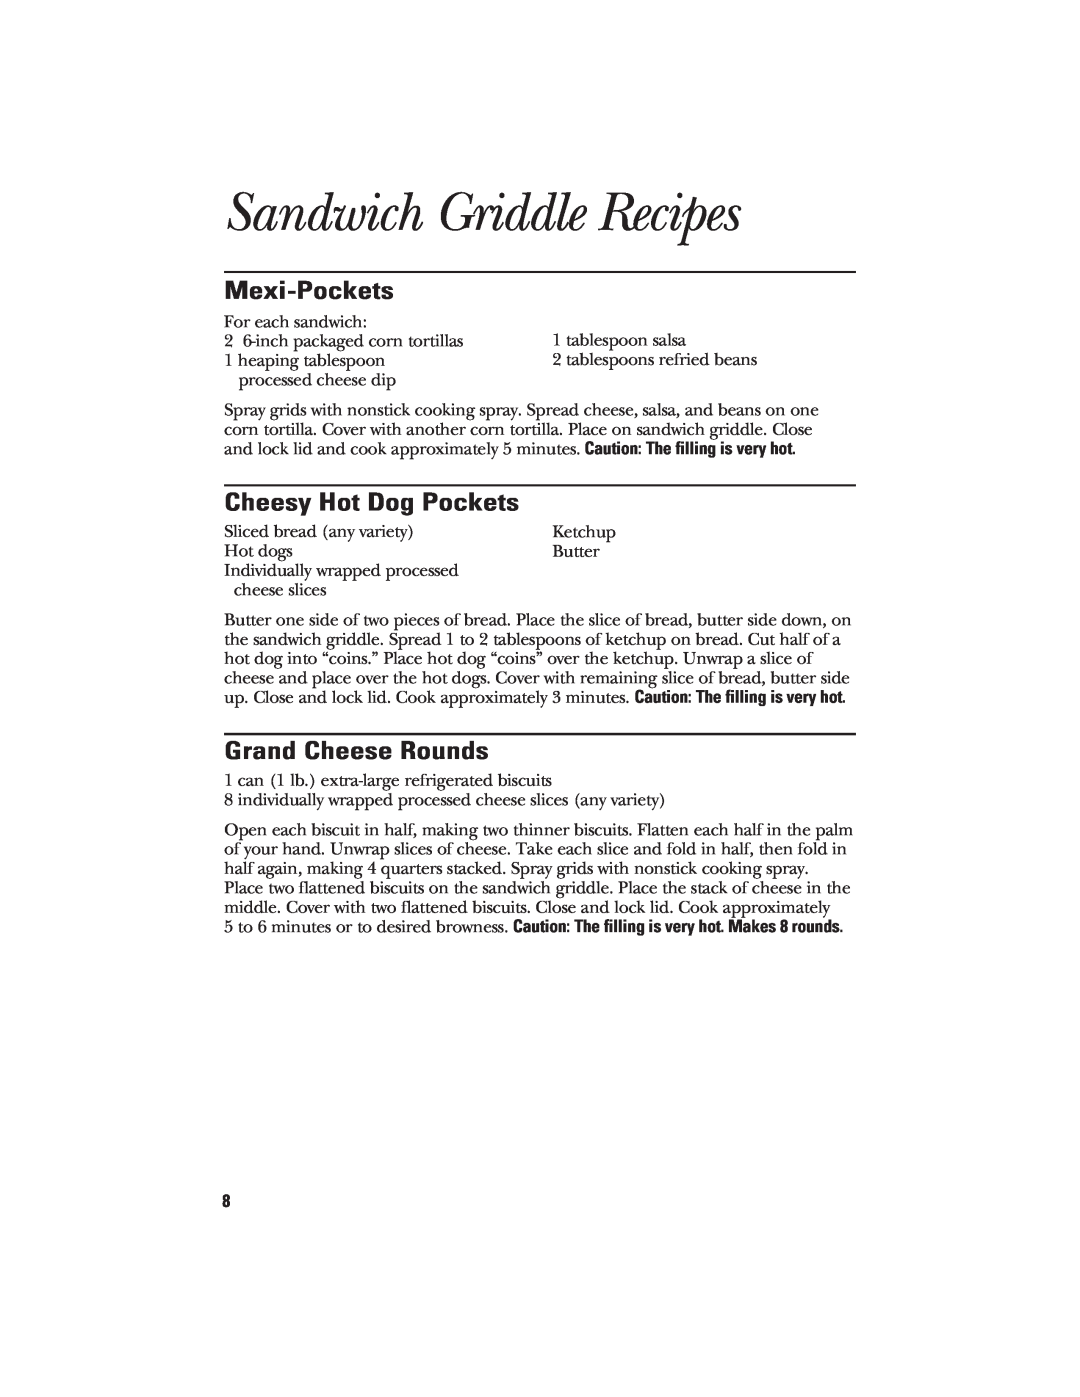 GE 106748 manual Sandwich Griddle Recipes, Mexi-Pockets, Cheesy Hot Dog Pockets, Grand Cheese Rounds 